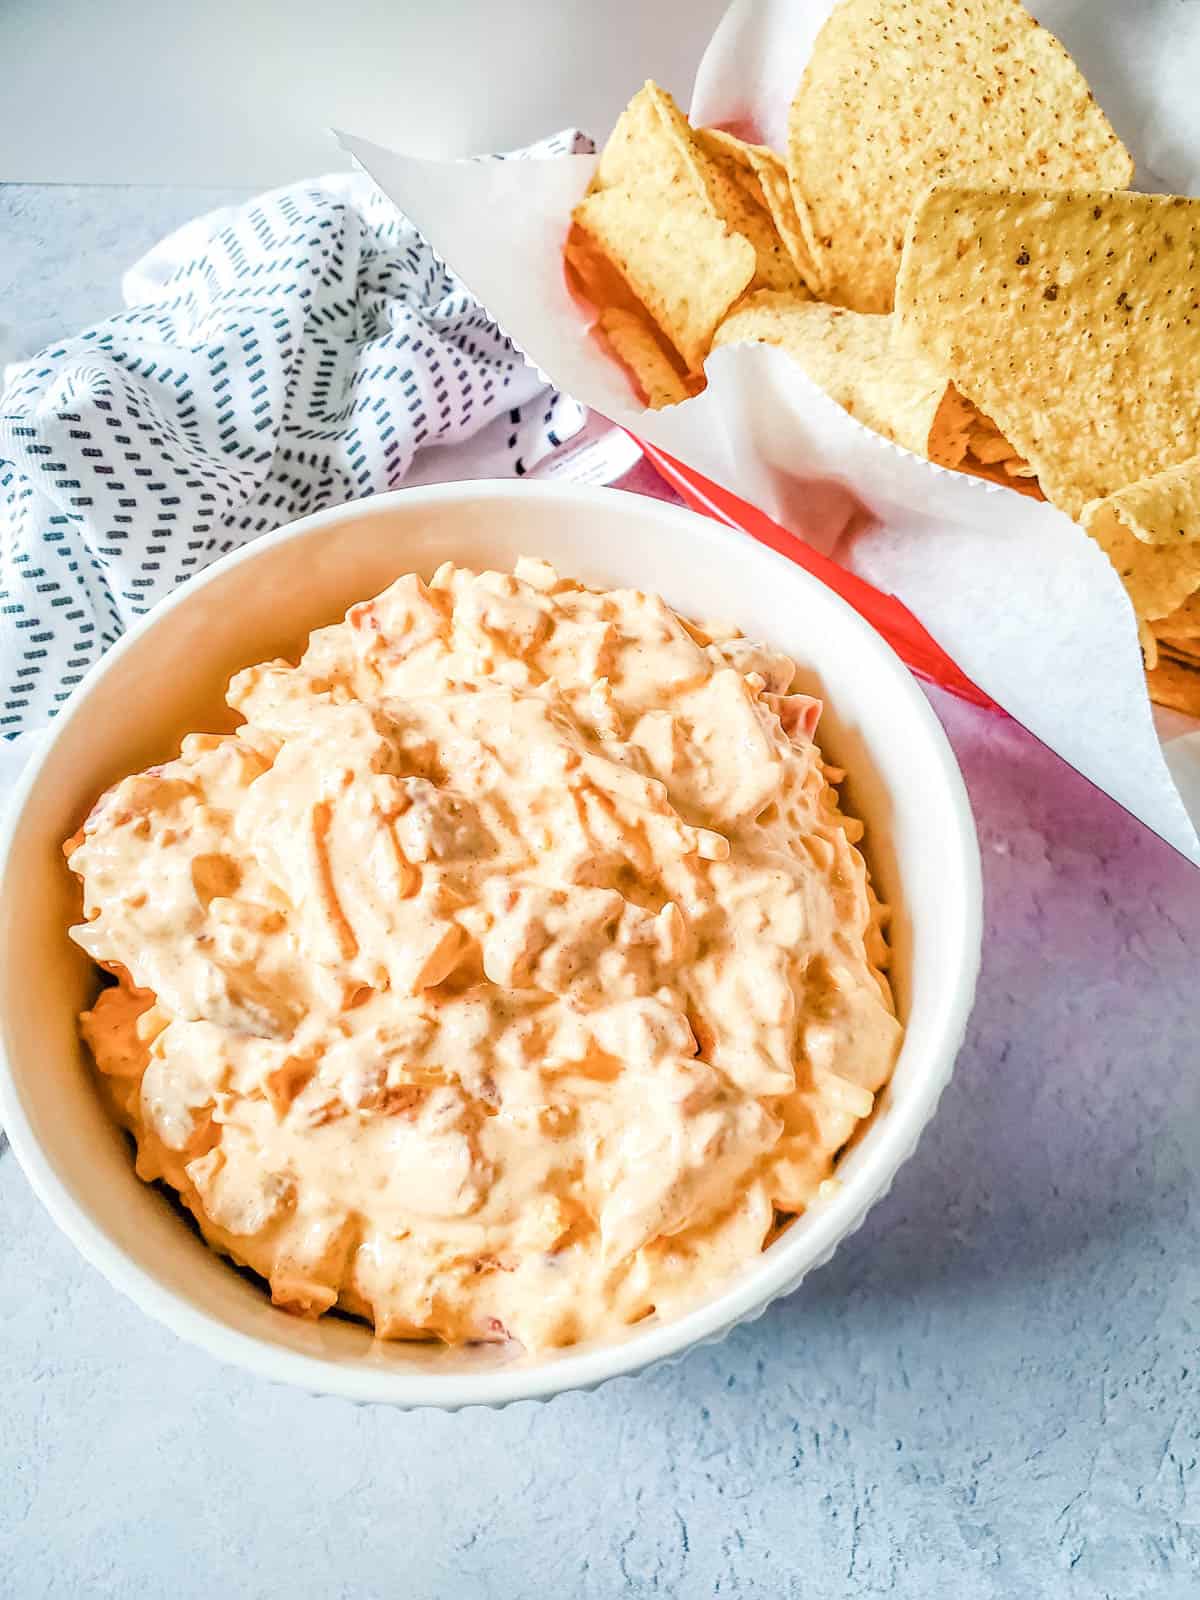 Delicious rotel boat dip with corn chips on the side.